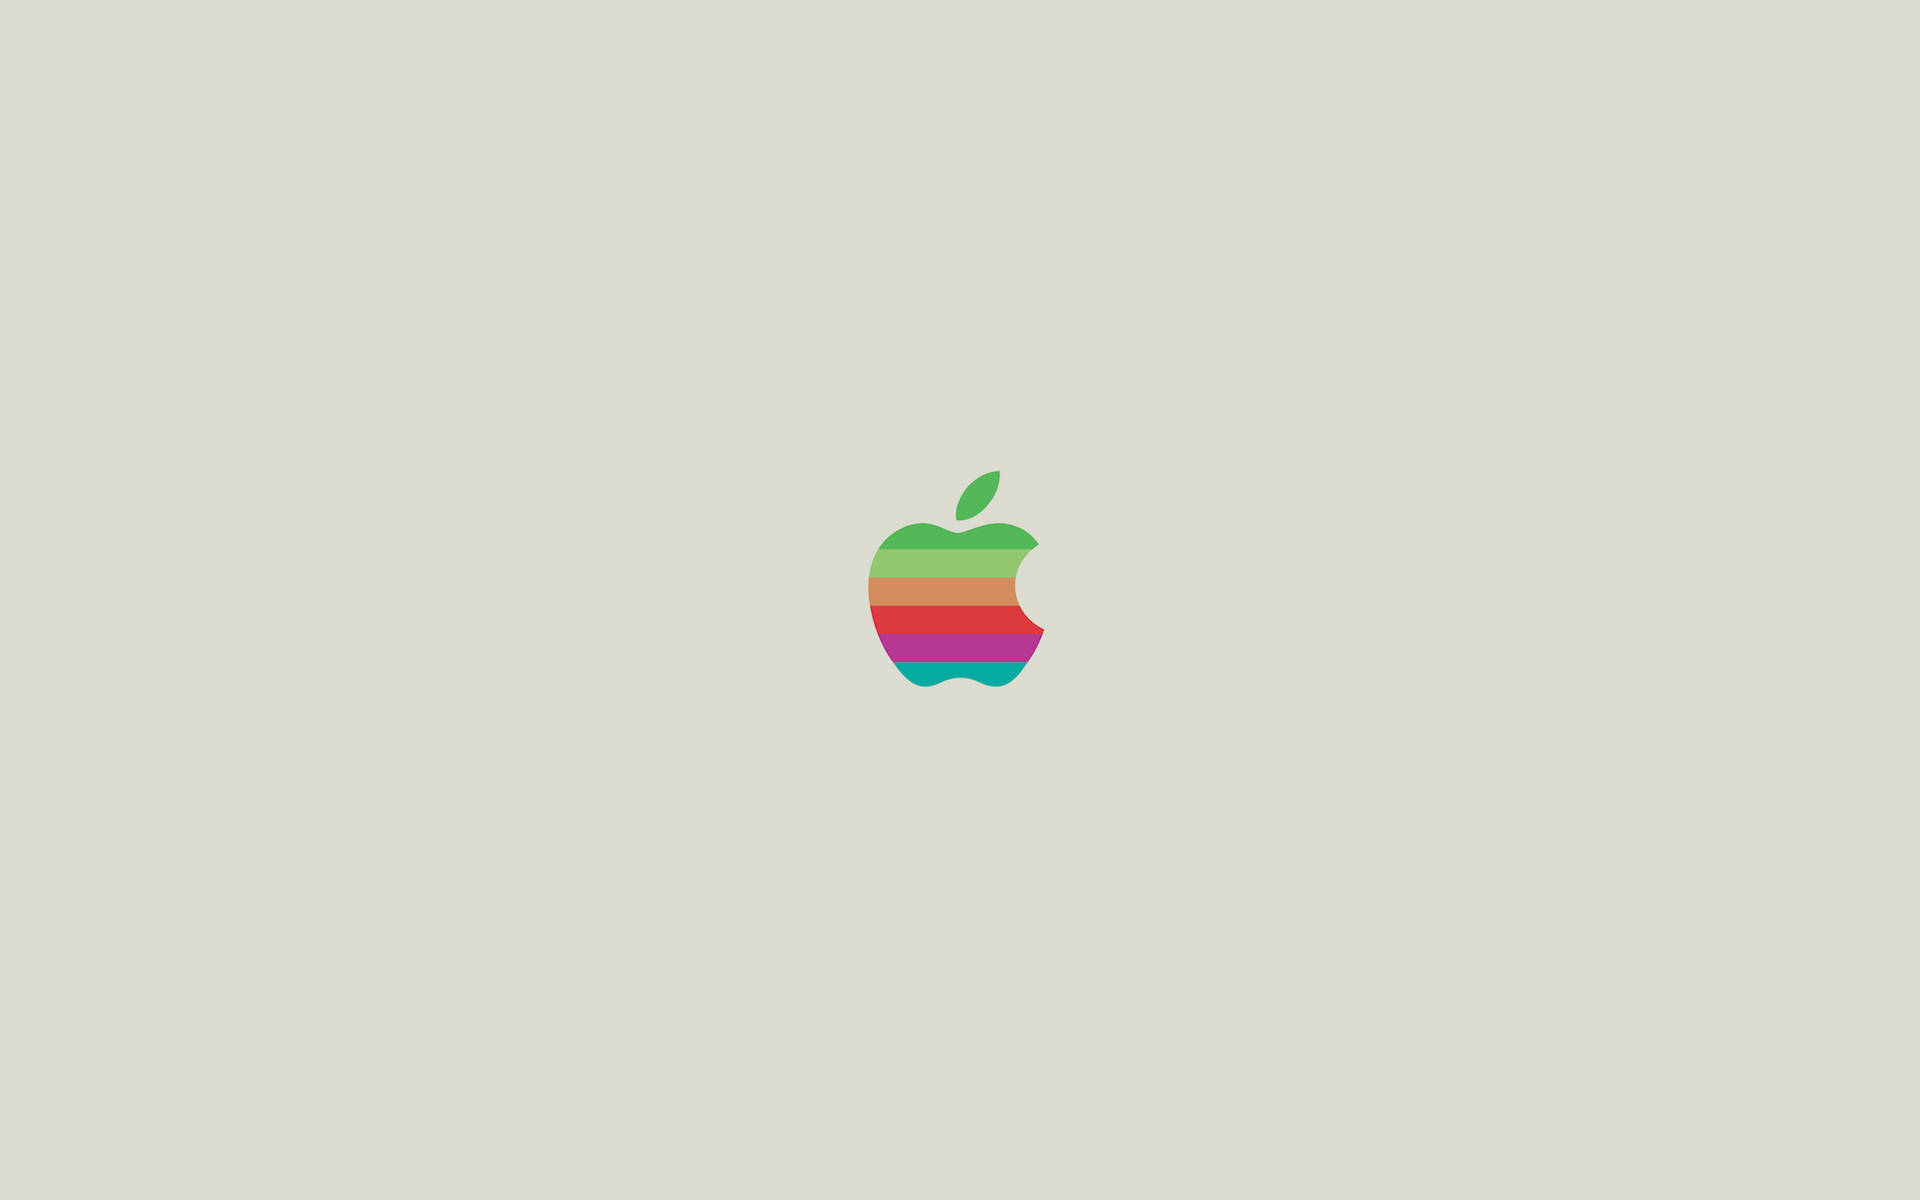 A colorful Macbook featuring the iconic logo Wallpaper